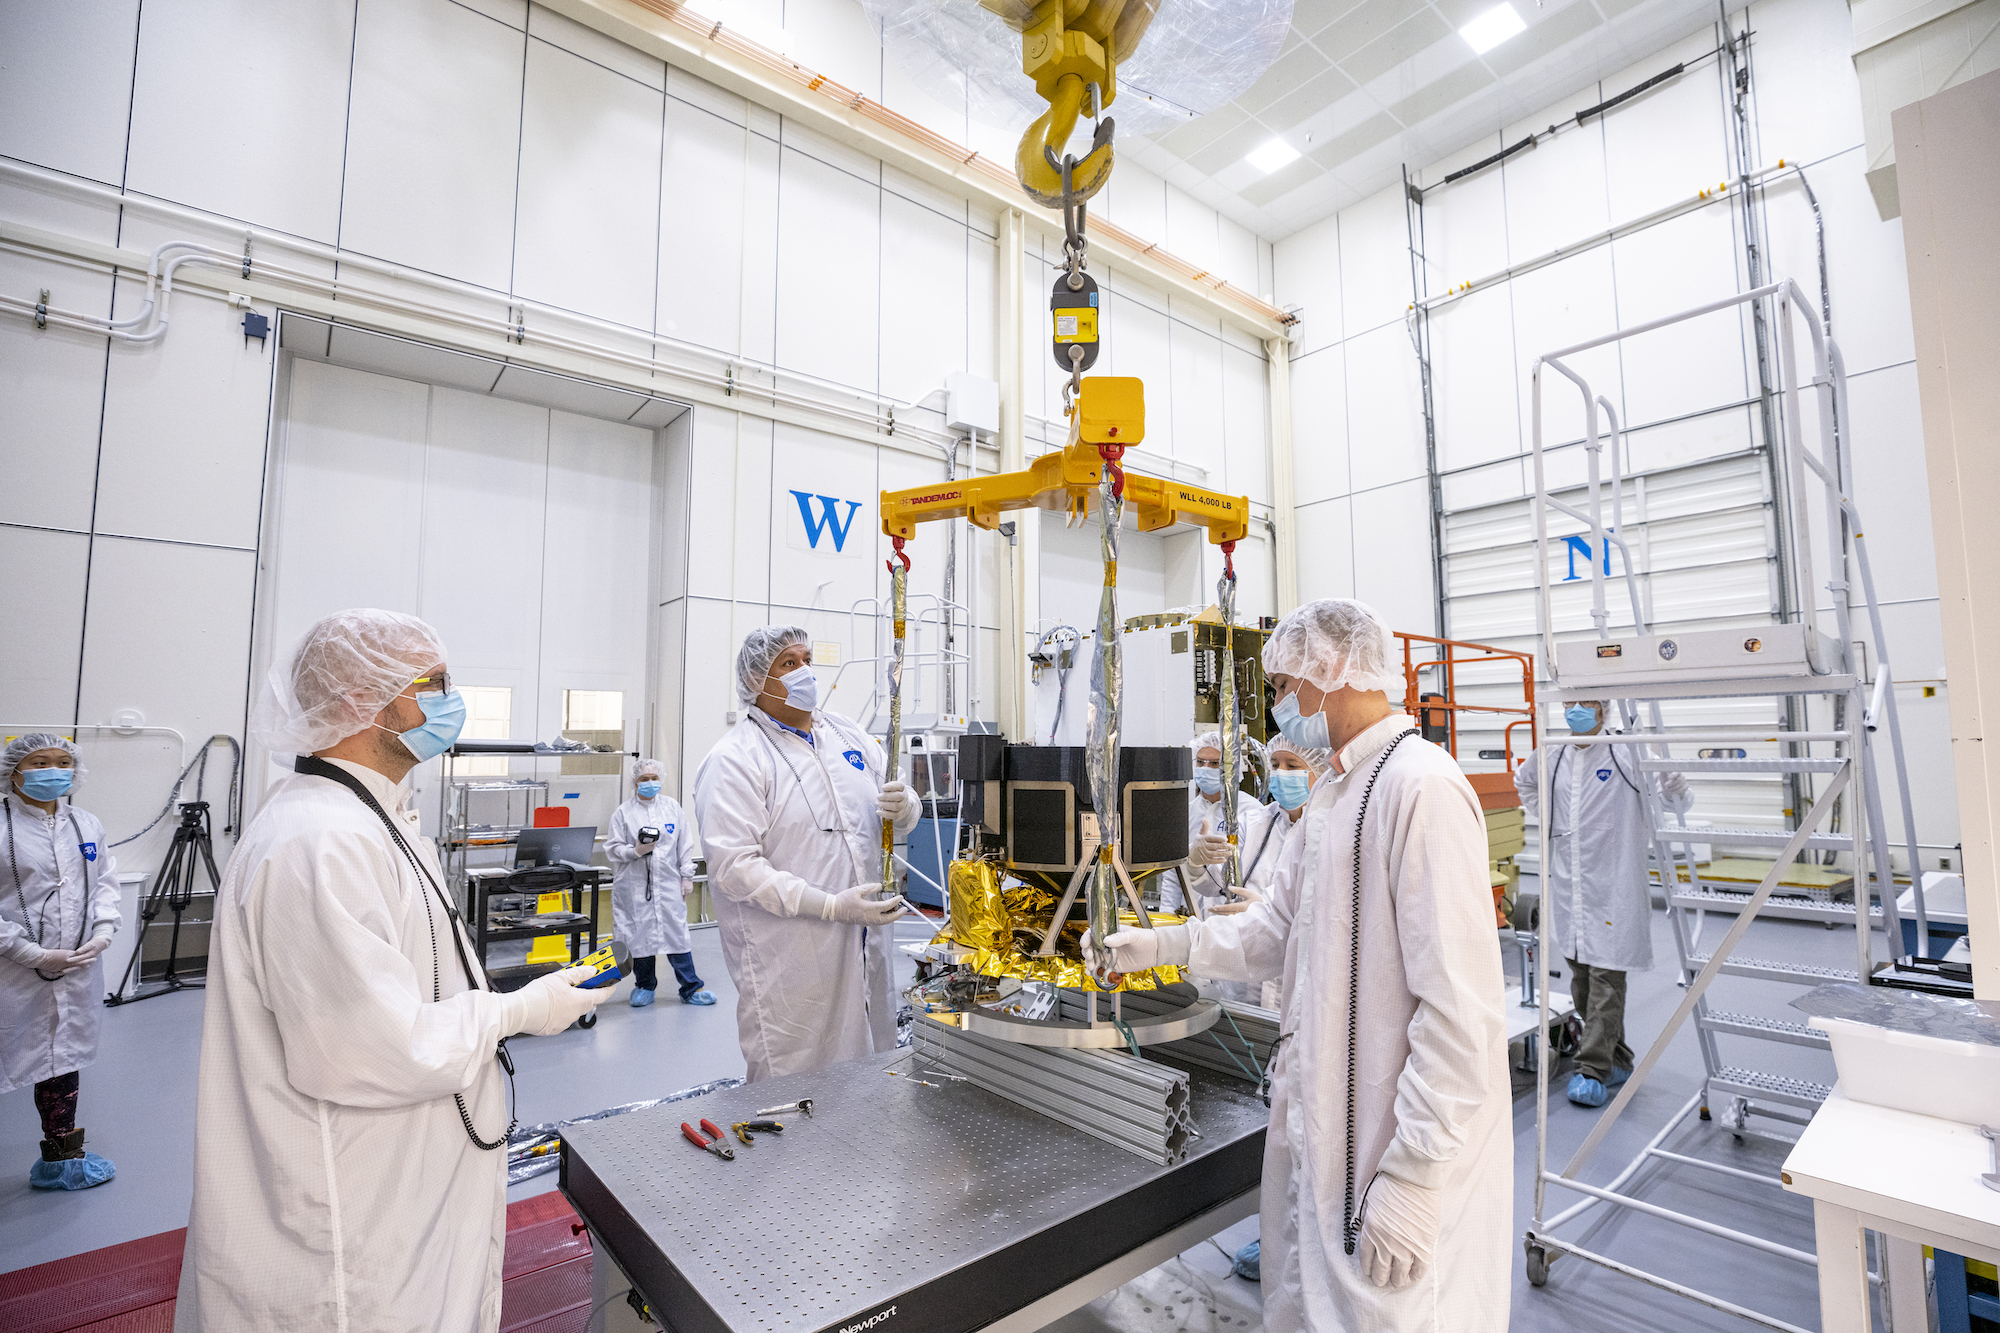 APL, which manages and is building NASA’s Double Asteroid Redirection Test (DART), led the installation of NEXT-C onto the spacecraft on Nov. 10, with team members from Aerojet Rocketdyne on hand to support the process.  Credit: NASA/Johns Hopkins APL/Ed Whitman